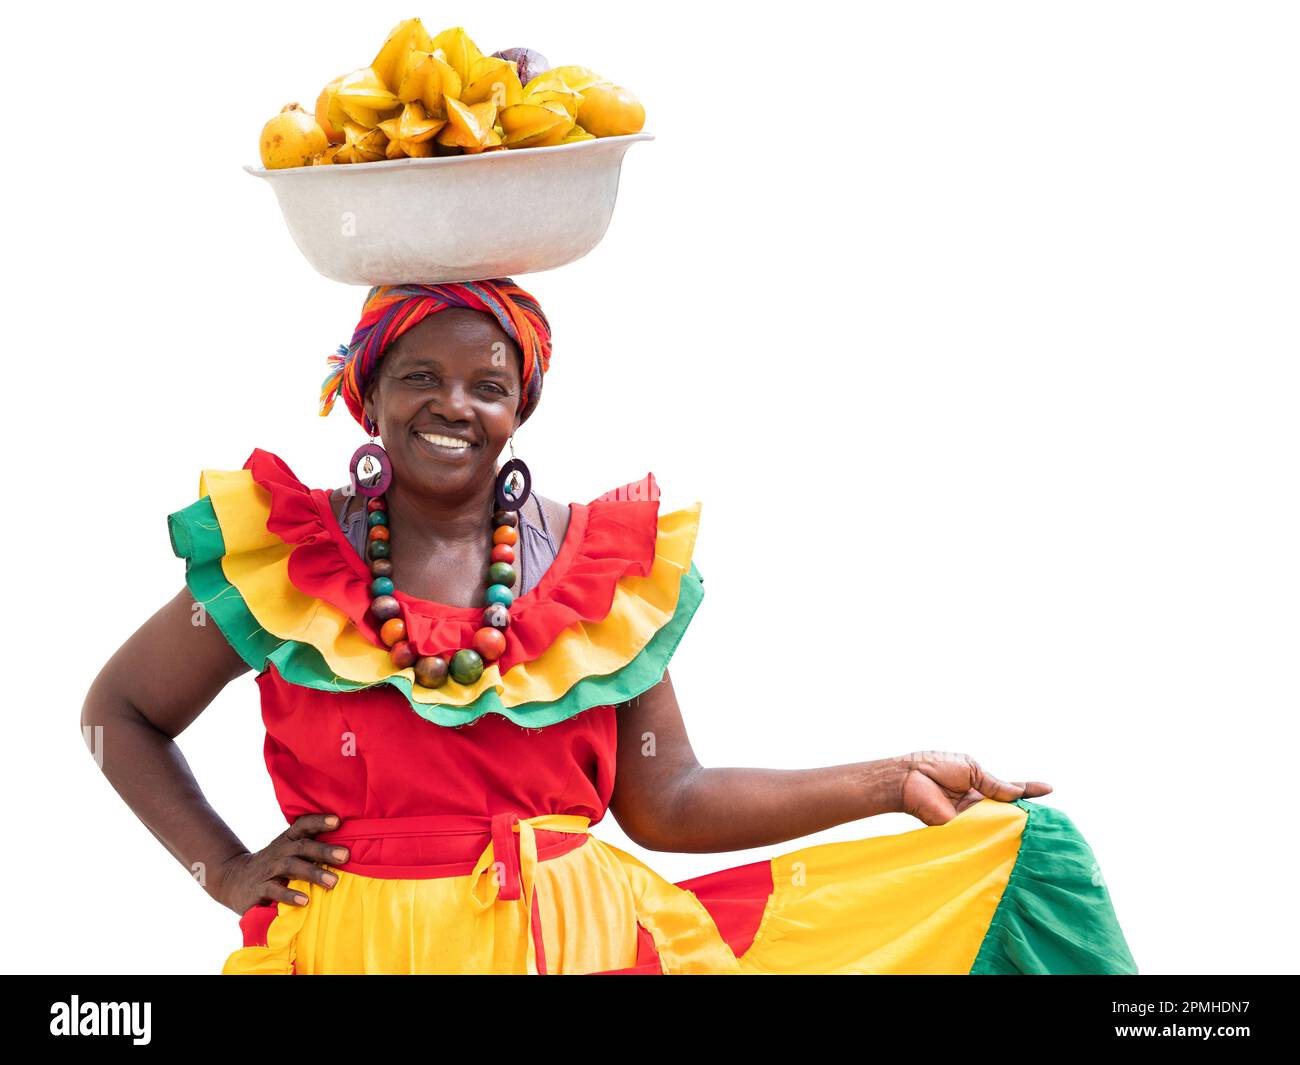 Happy fresh fruit street vendor, Palenquera, isolated on white background. Cheerful Afro-Colombian woman in traditional costumes, Cartagena, Colombia. Stock Photo